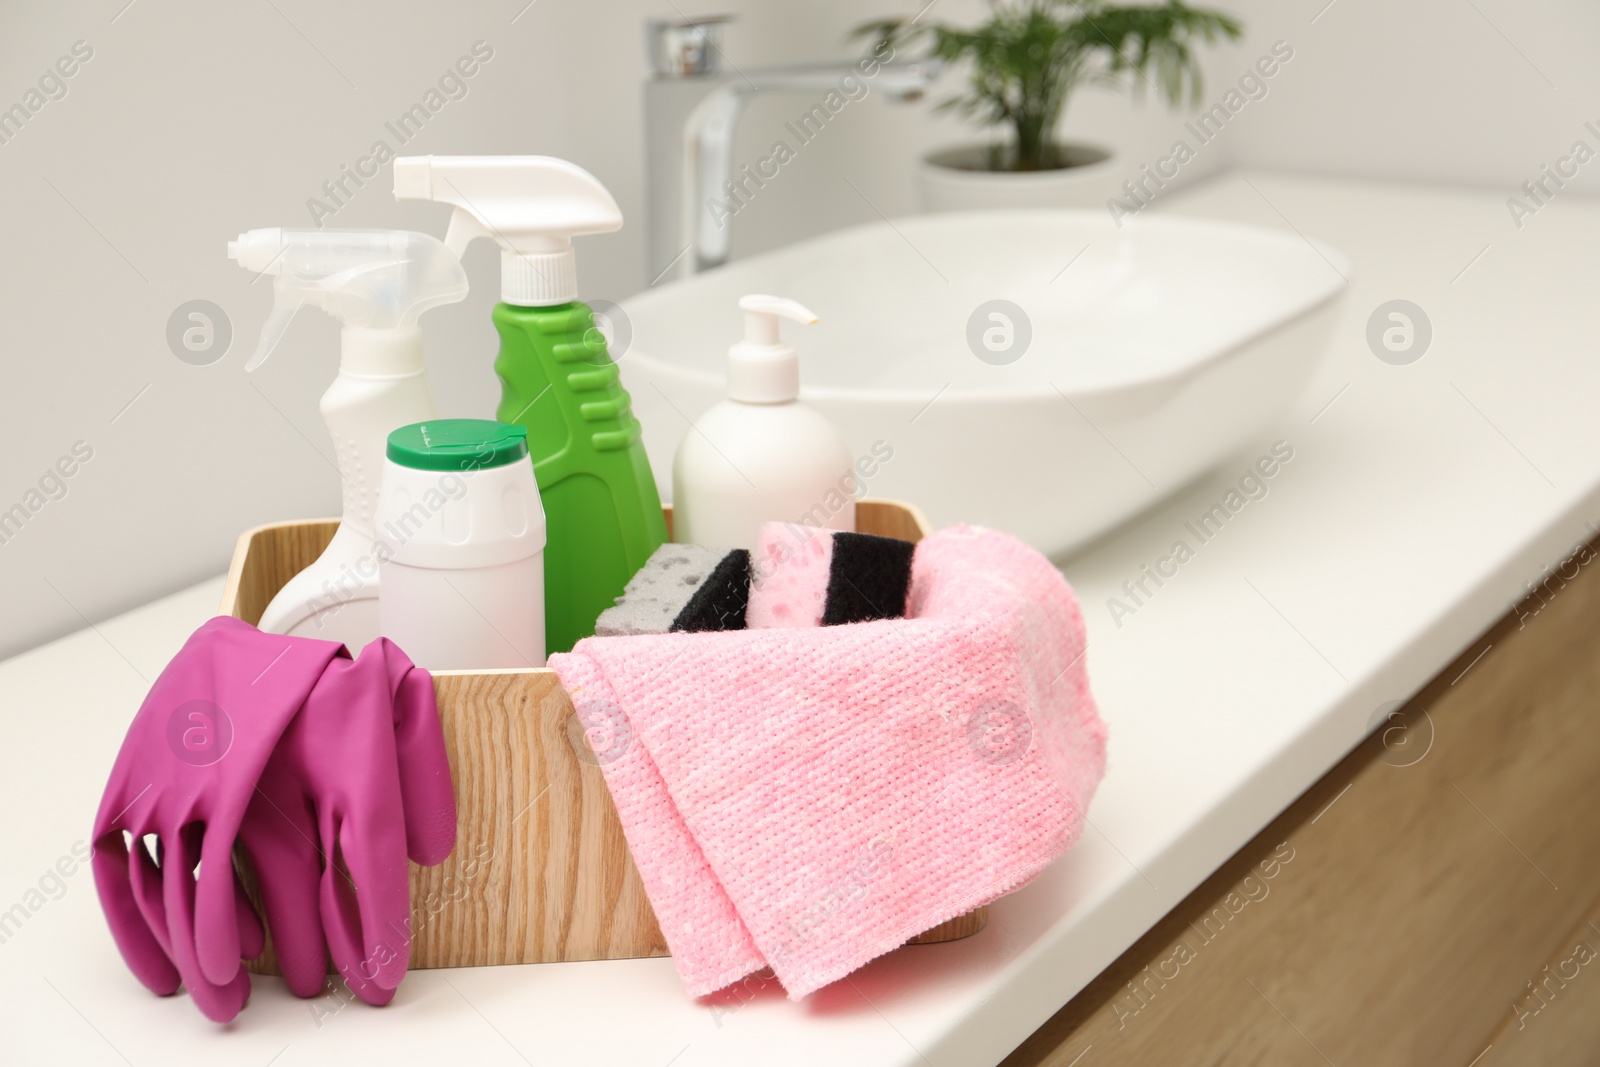 Photo of Different cleaning products in wooden box on countertop indoors